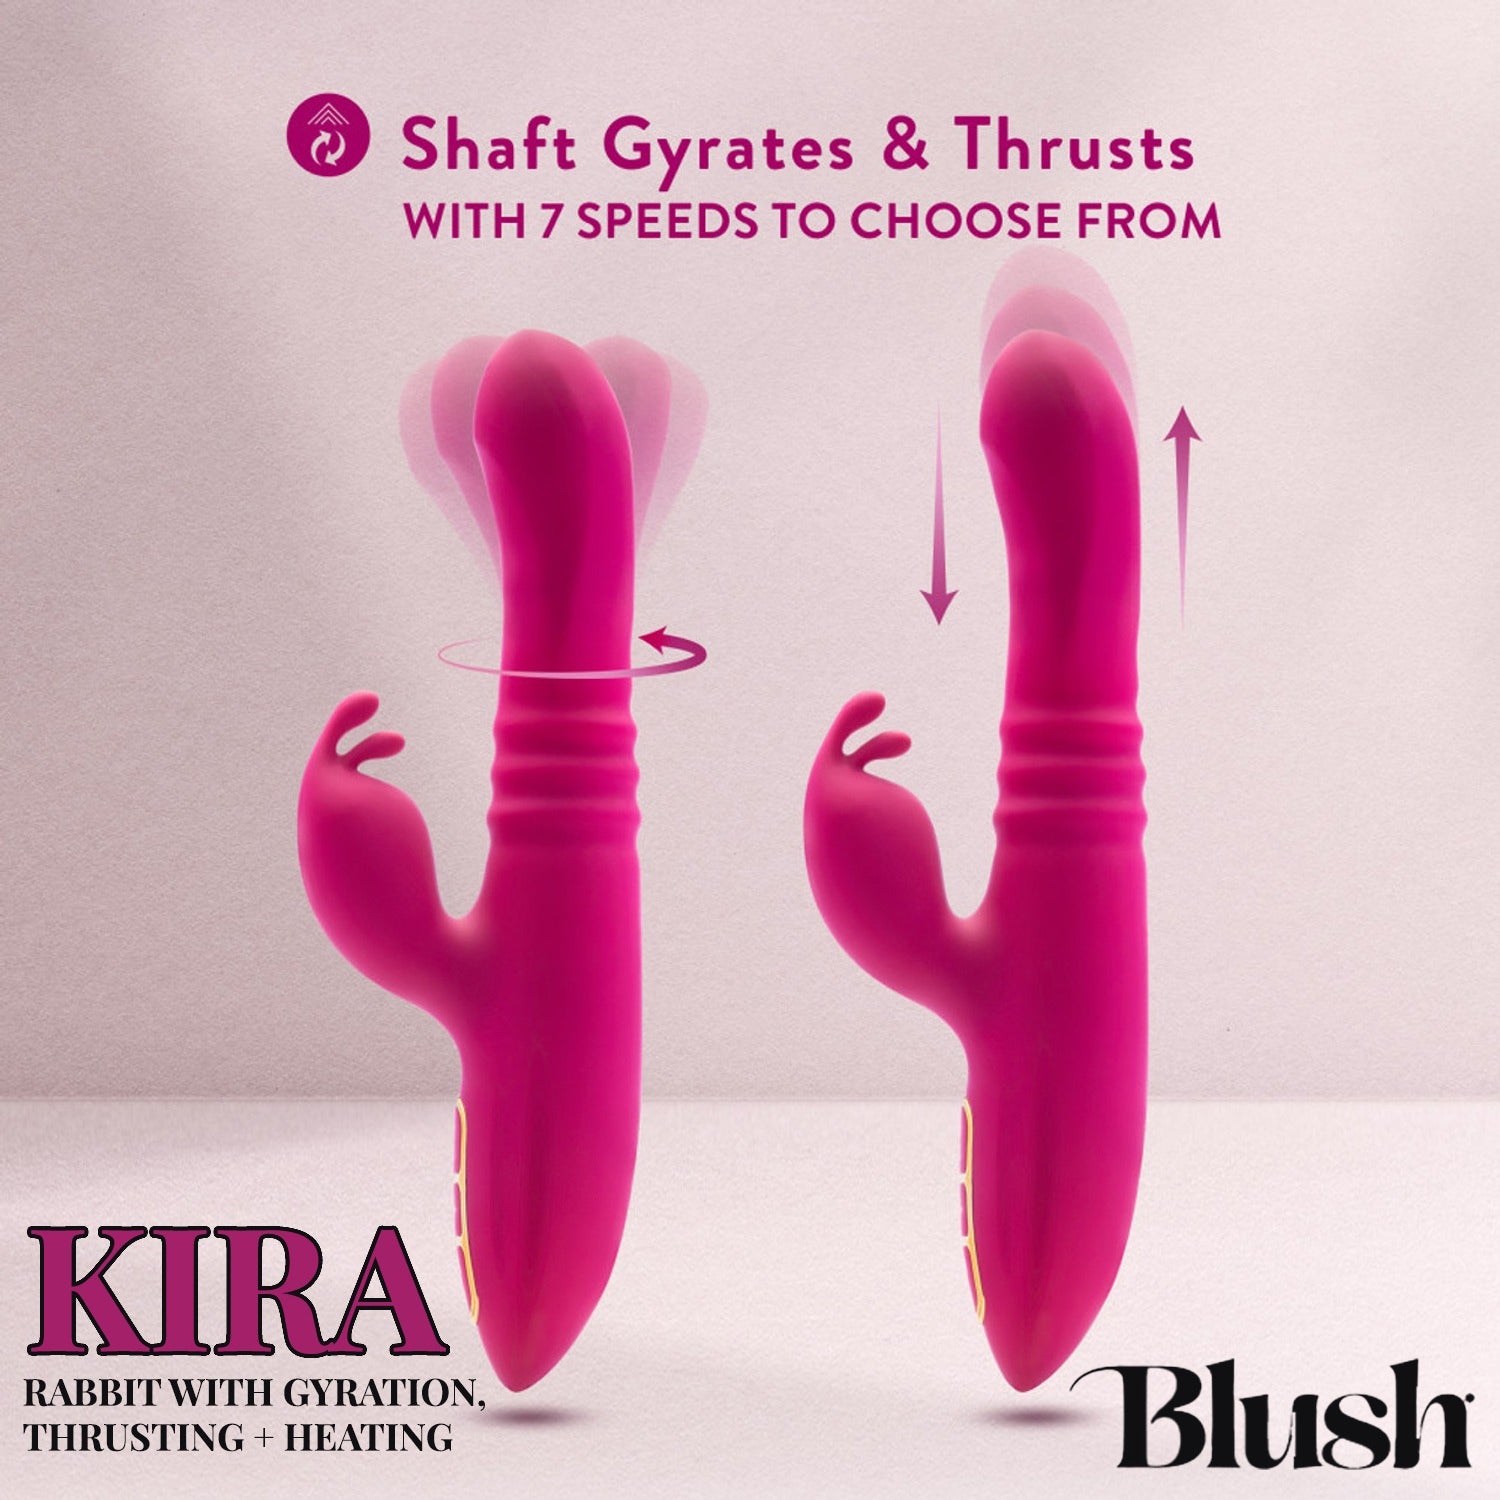 Feature icon for Shaft Gyrates & thrusts with 7 speeds to choose from. Below are 2 Blush Kira Rabbit Vibes on the left has an arrow circling around the shaft indicating where it gyrates, and on the right side are 2 up & down arrows on each side indicating the thrusting movement on the product. On the bottom right is the product name: Kira Rabbit with Gyration, Thrusting + Heating, and on the bottom right is the Blush Collection logo.